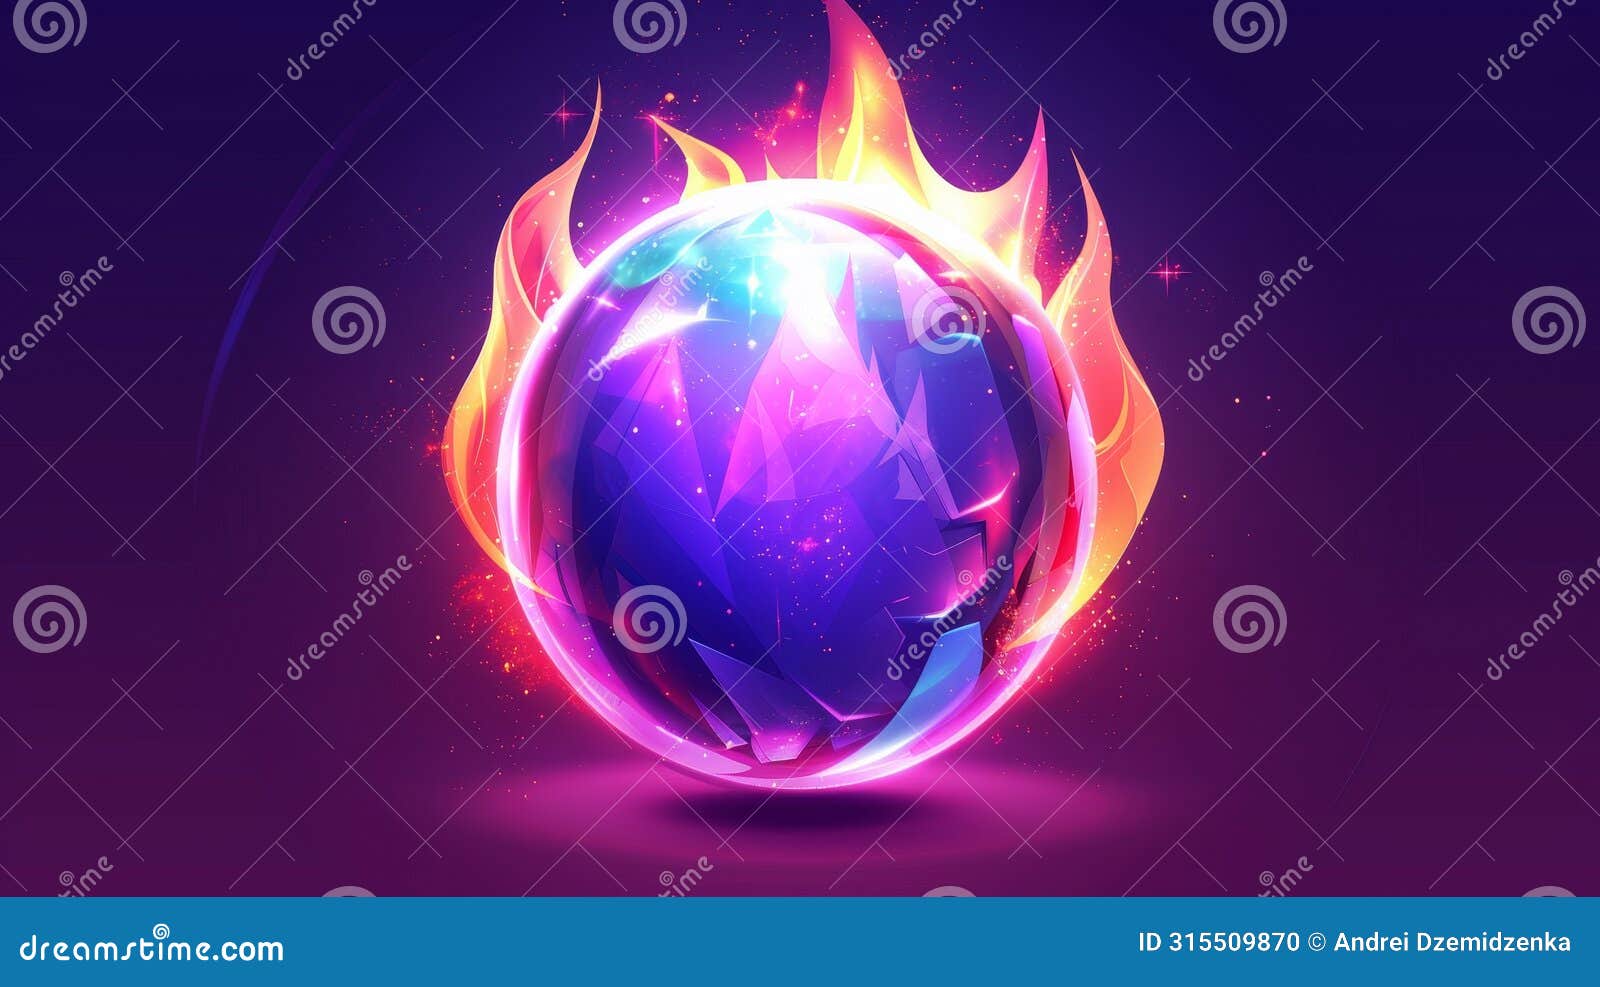 magic prophecy circle icon. glow crystal ball  for fantasy game object. circle light globe magician  for